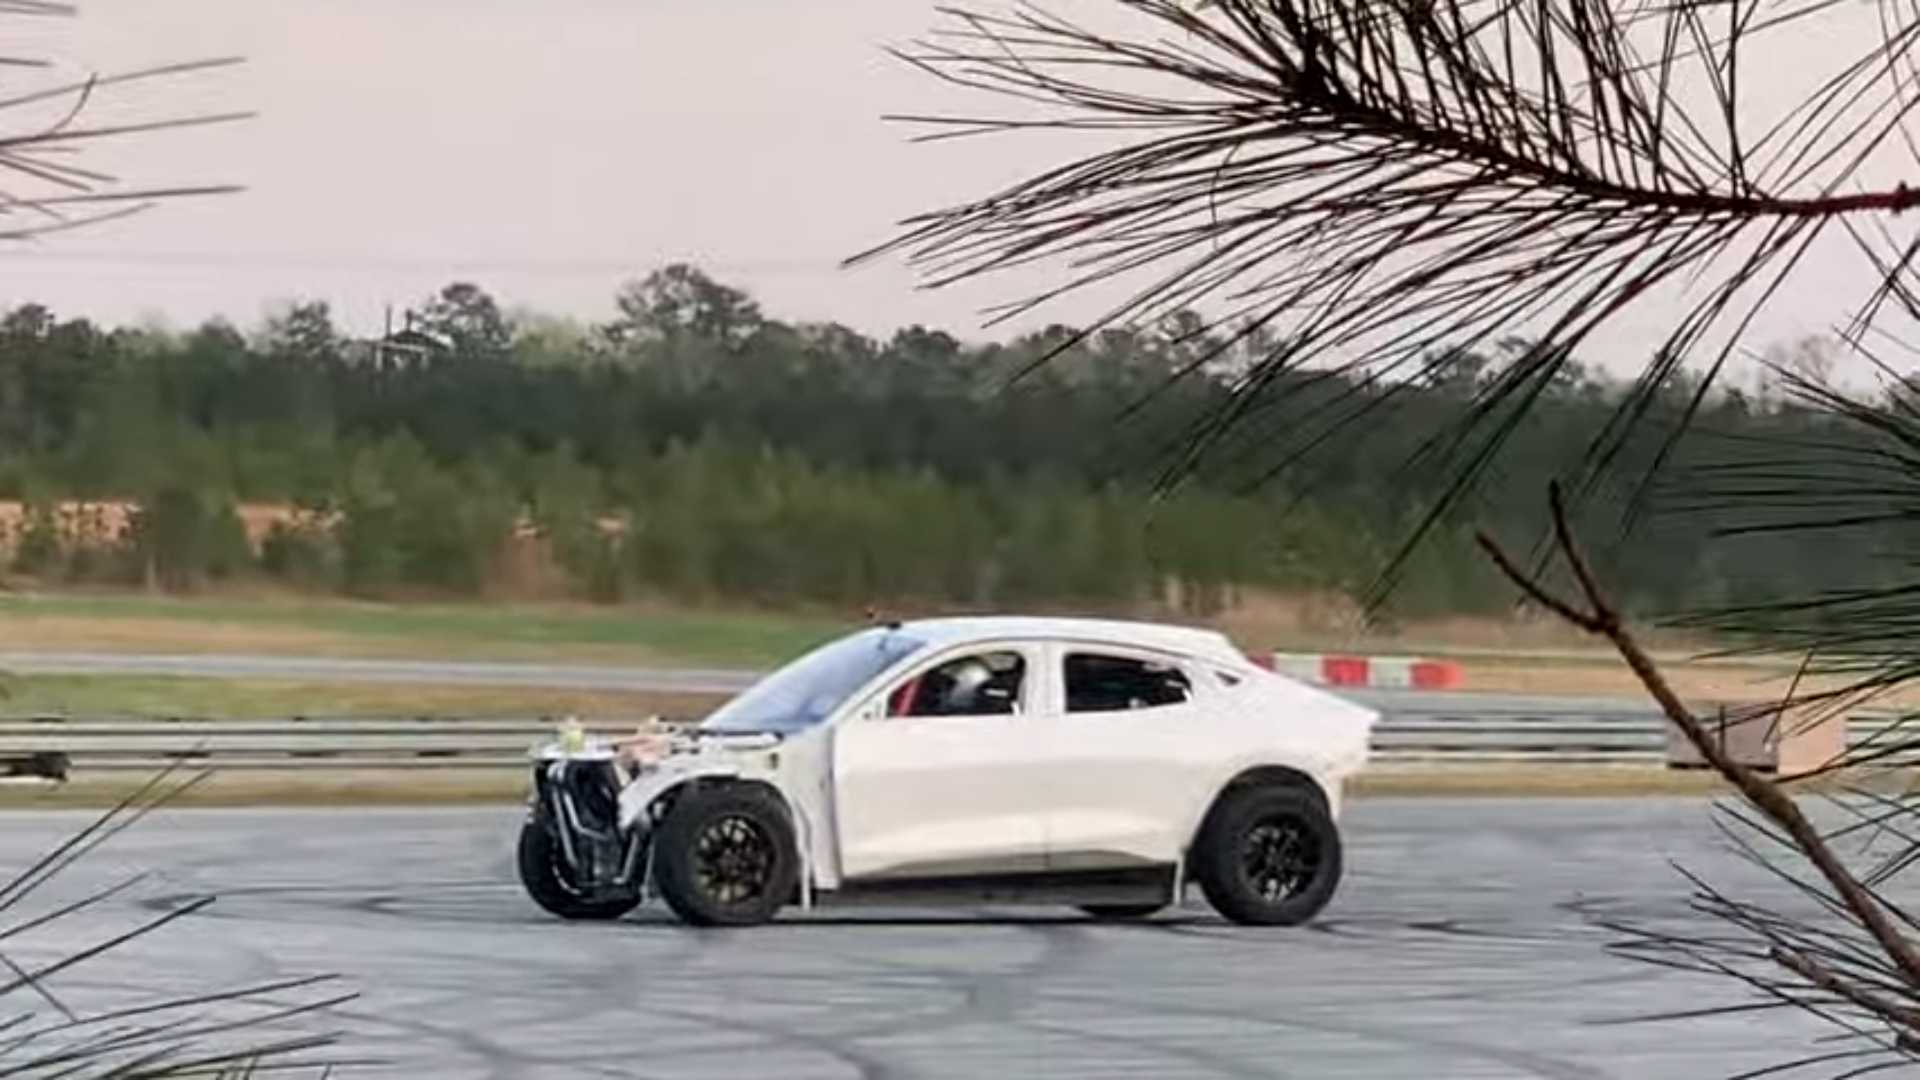 What Is Ford Executing In The Woods With This Outrageous Mustang Mach-E?